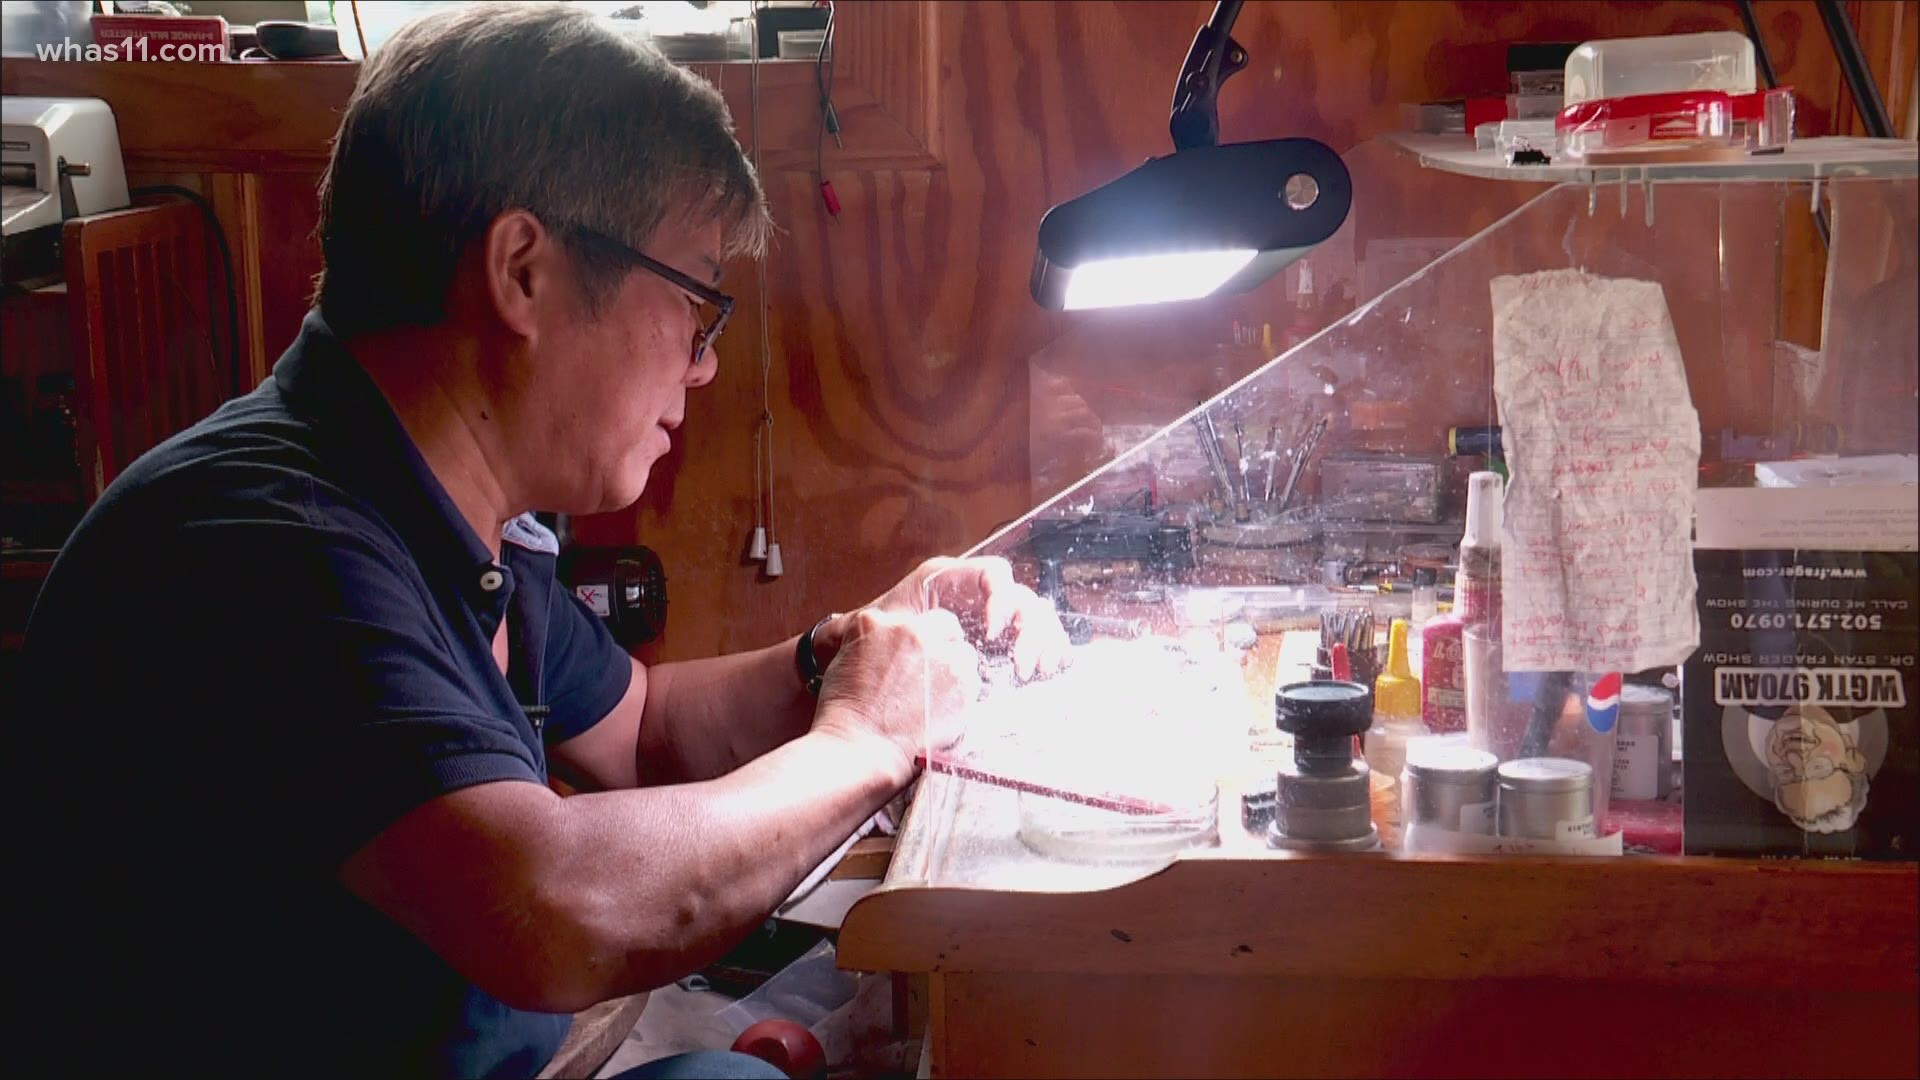 Charlie Wang found his passion in Louisville as a watch repairman.